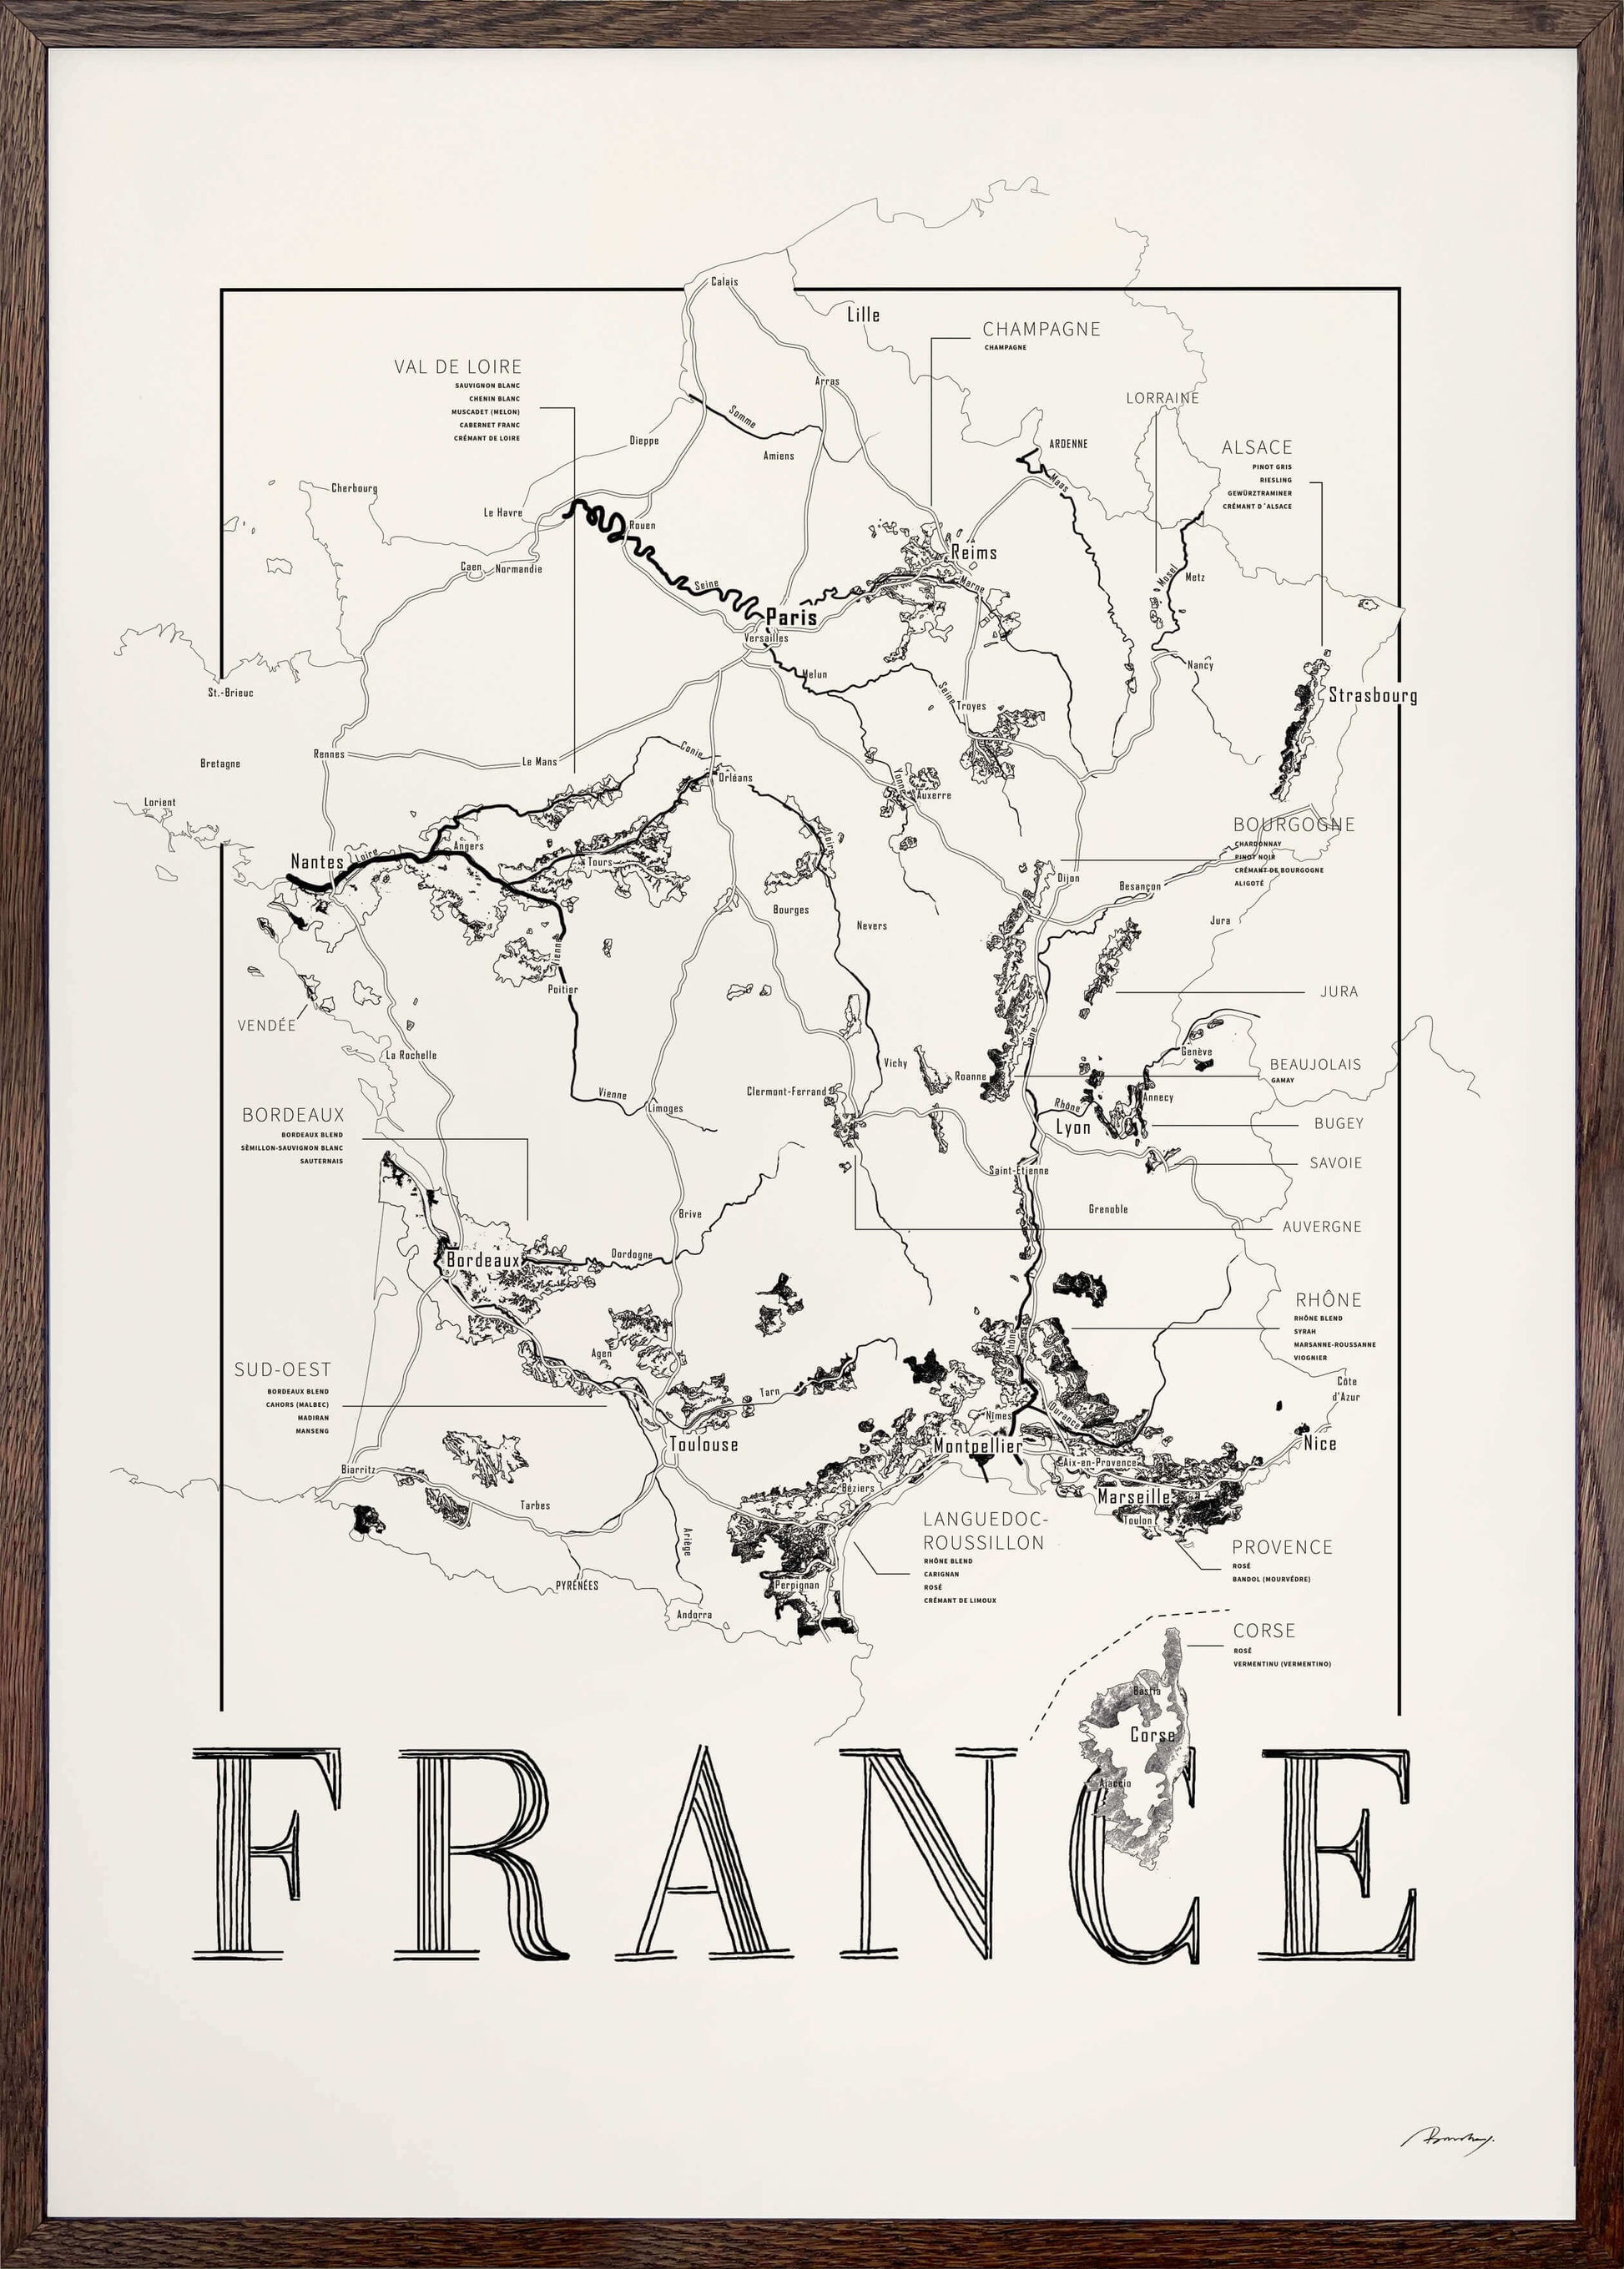 France Wine map poster. Exclusive wine map posters. Premium quality wine maps printed on environmentally friendly FSC marked paper. 